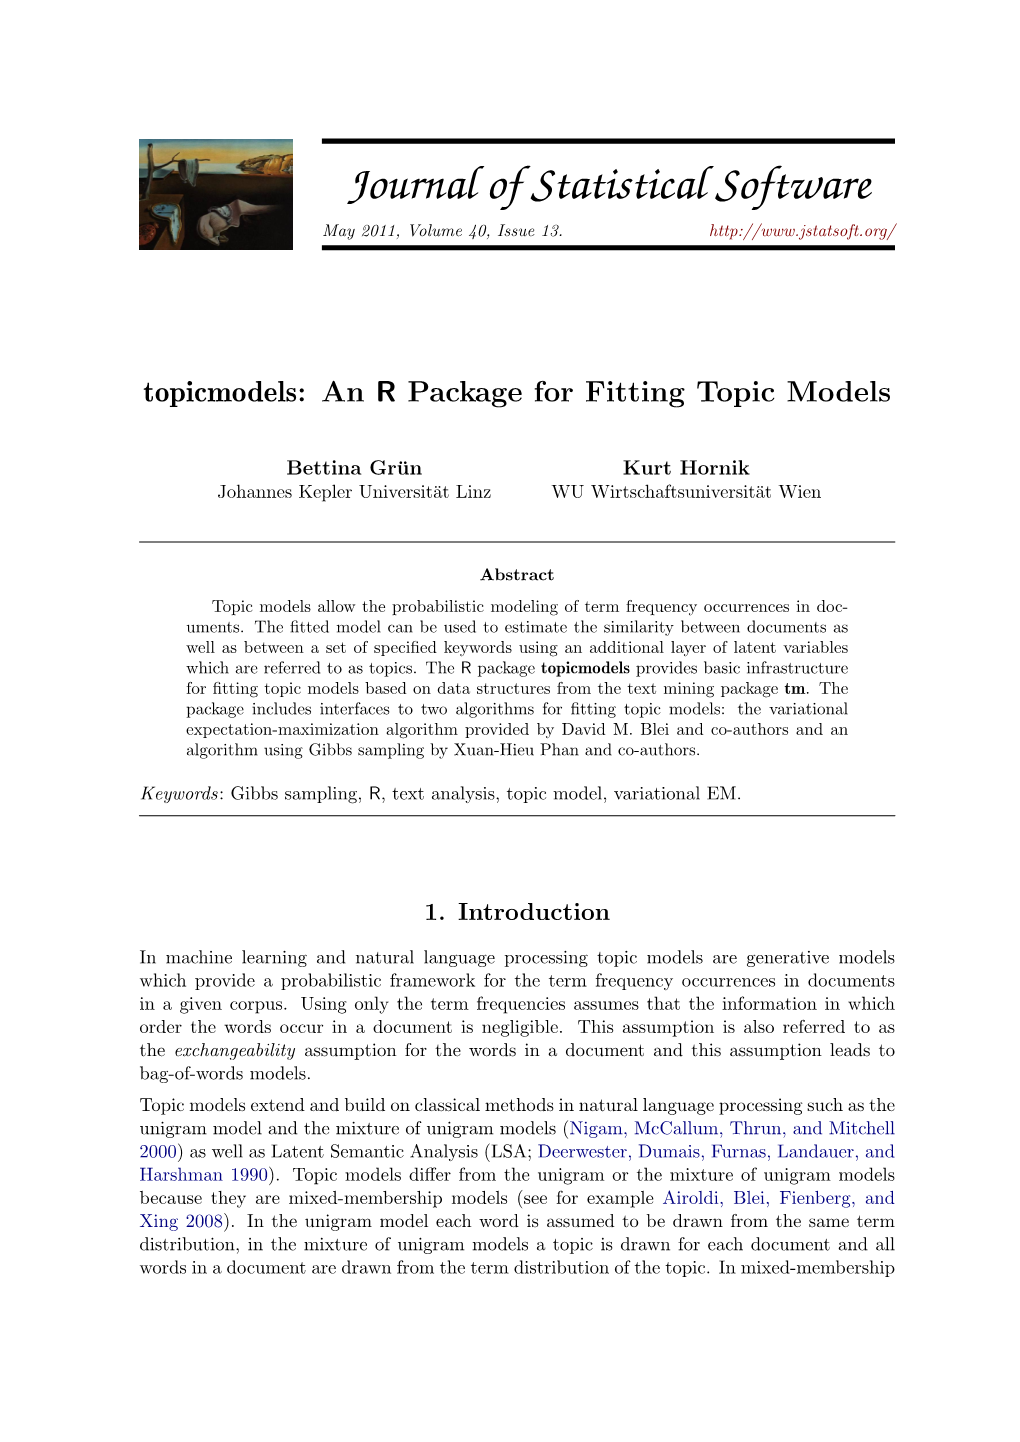 Topicmodels: an R Package for Fitting Topic Models